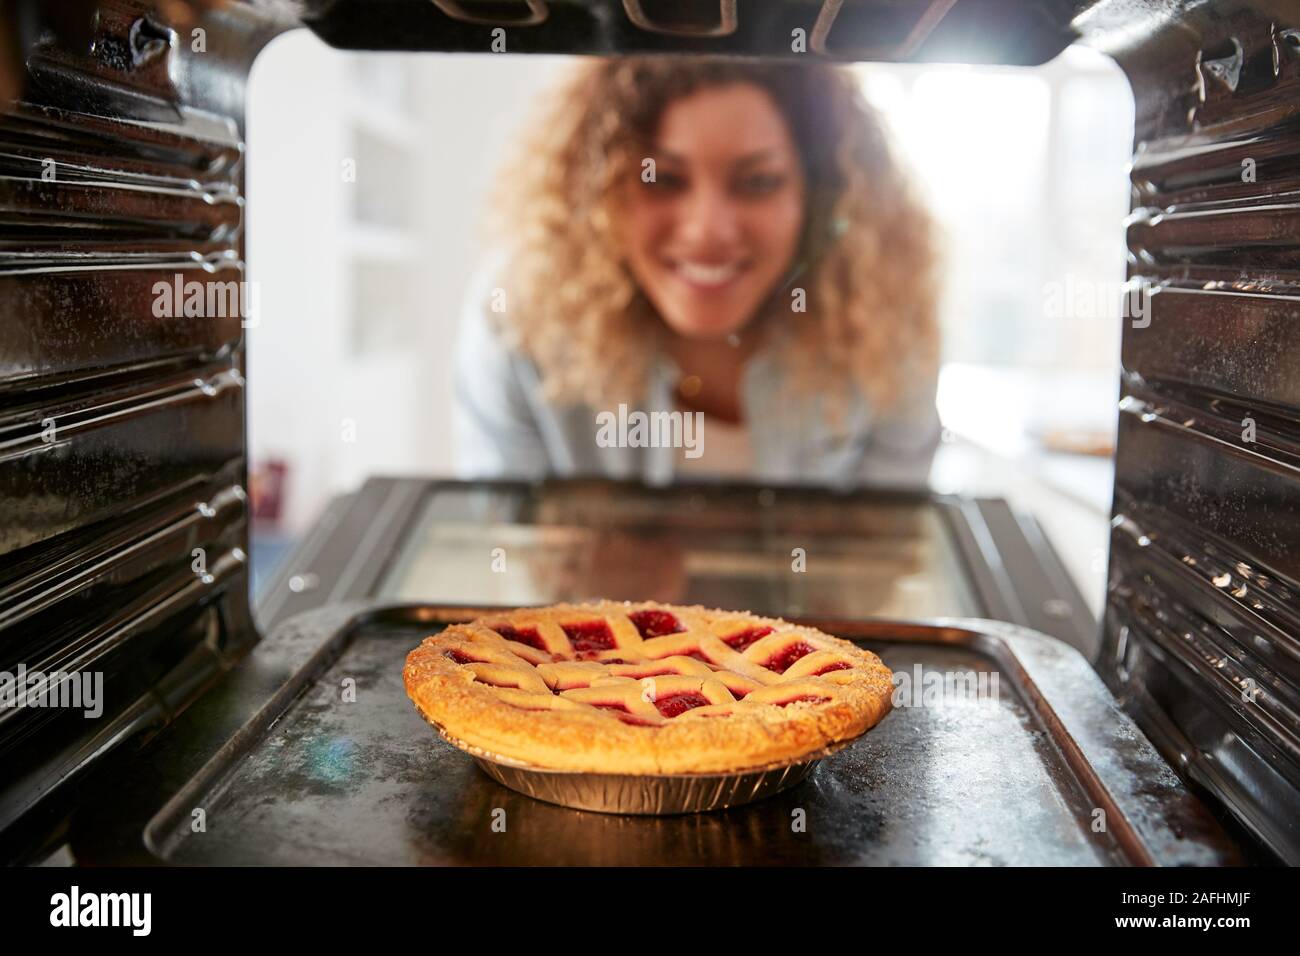 View Looking Out From Inside Oven As Woman Cooks Fruit Tart Stock Photo